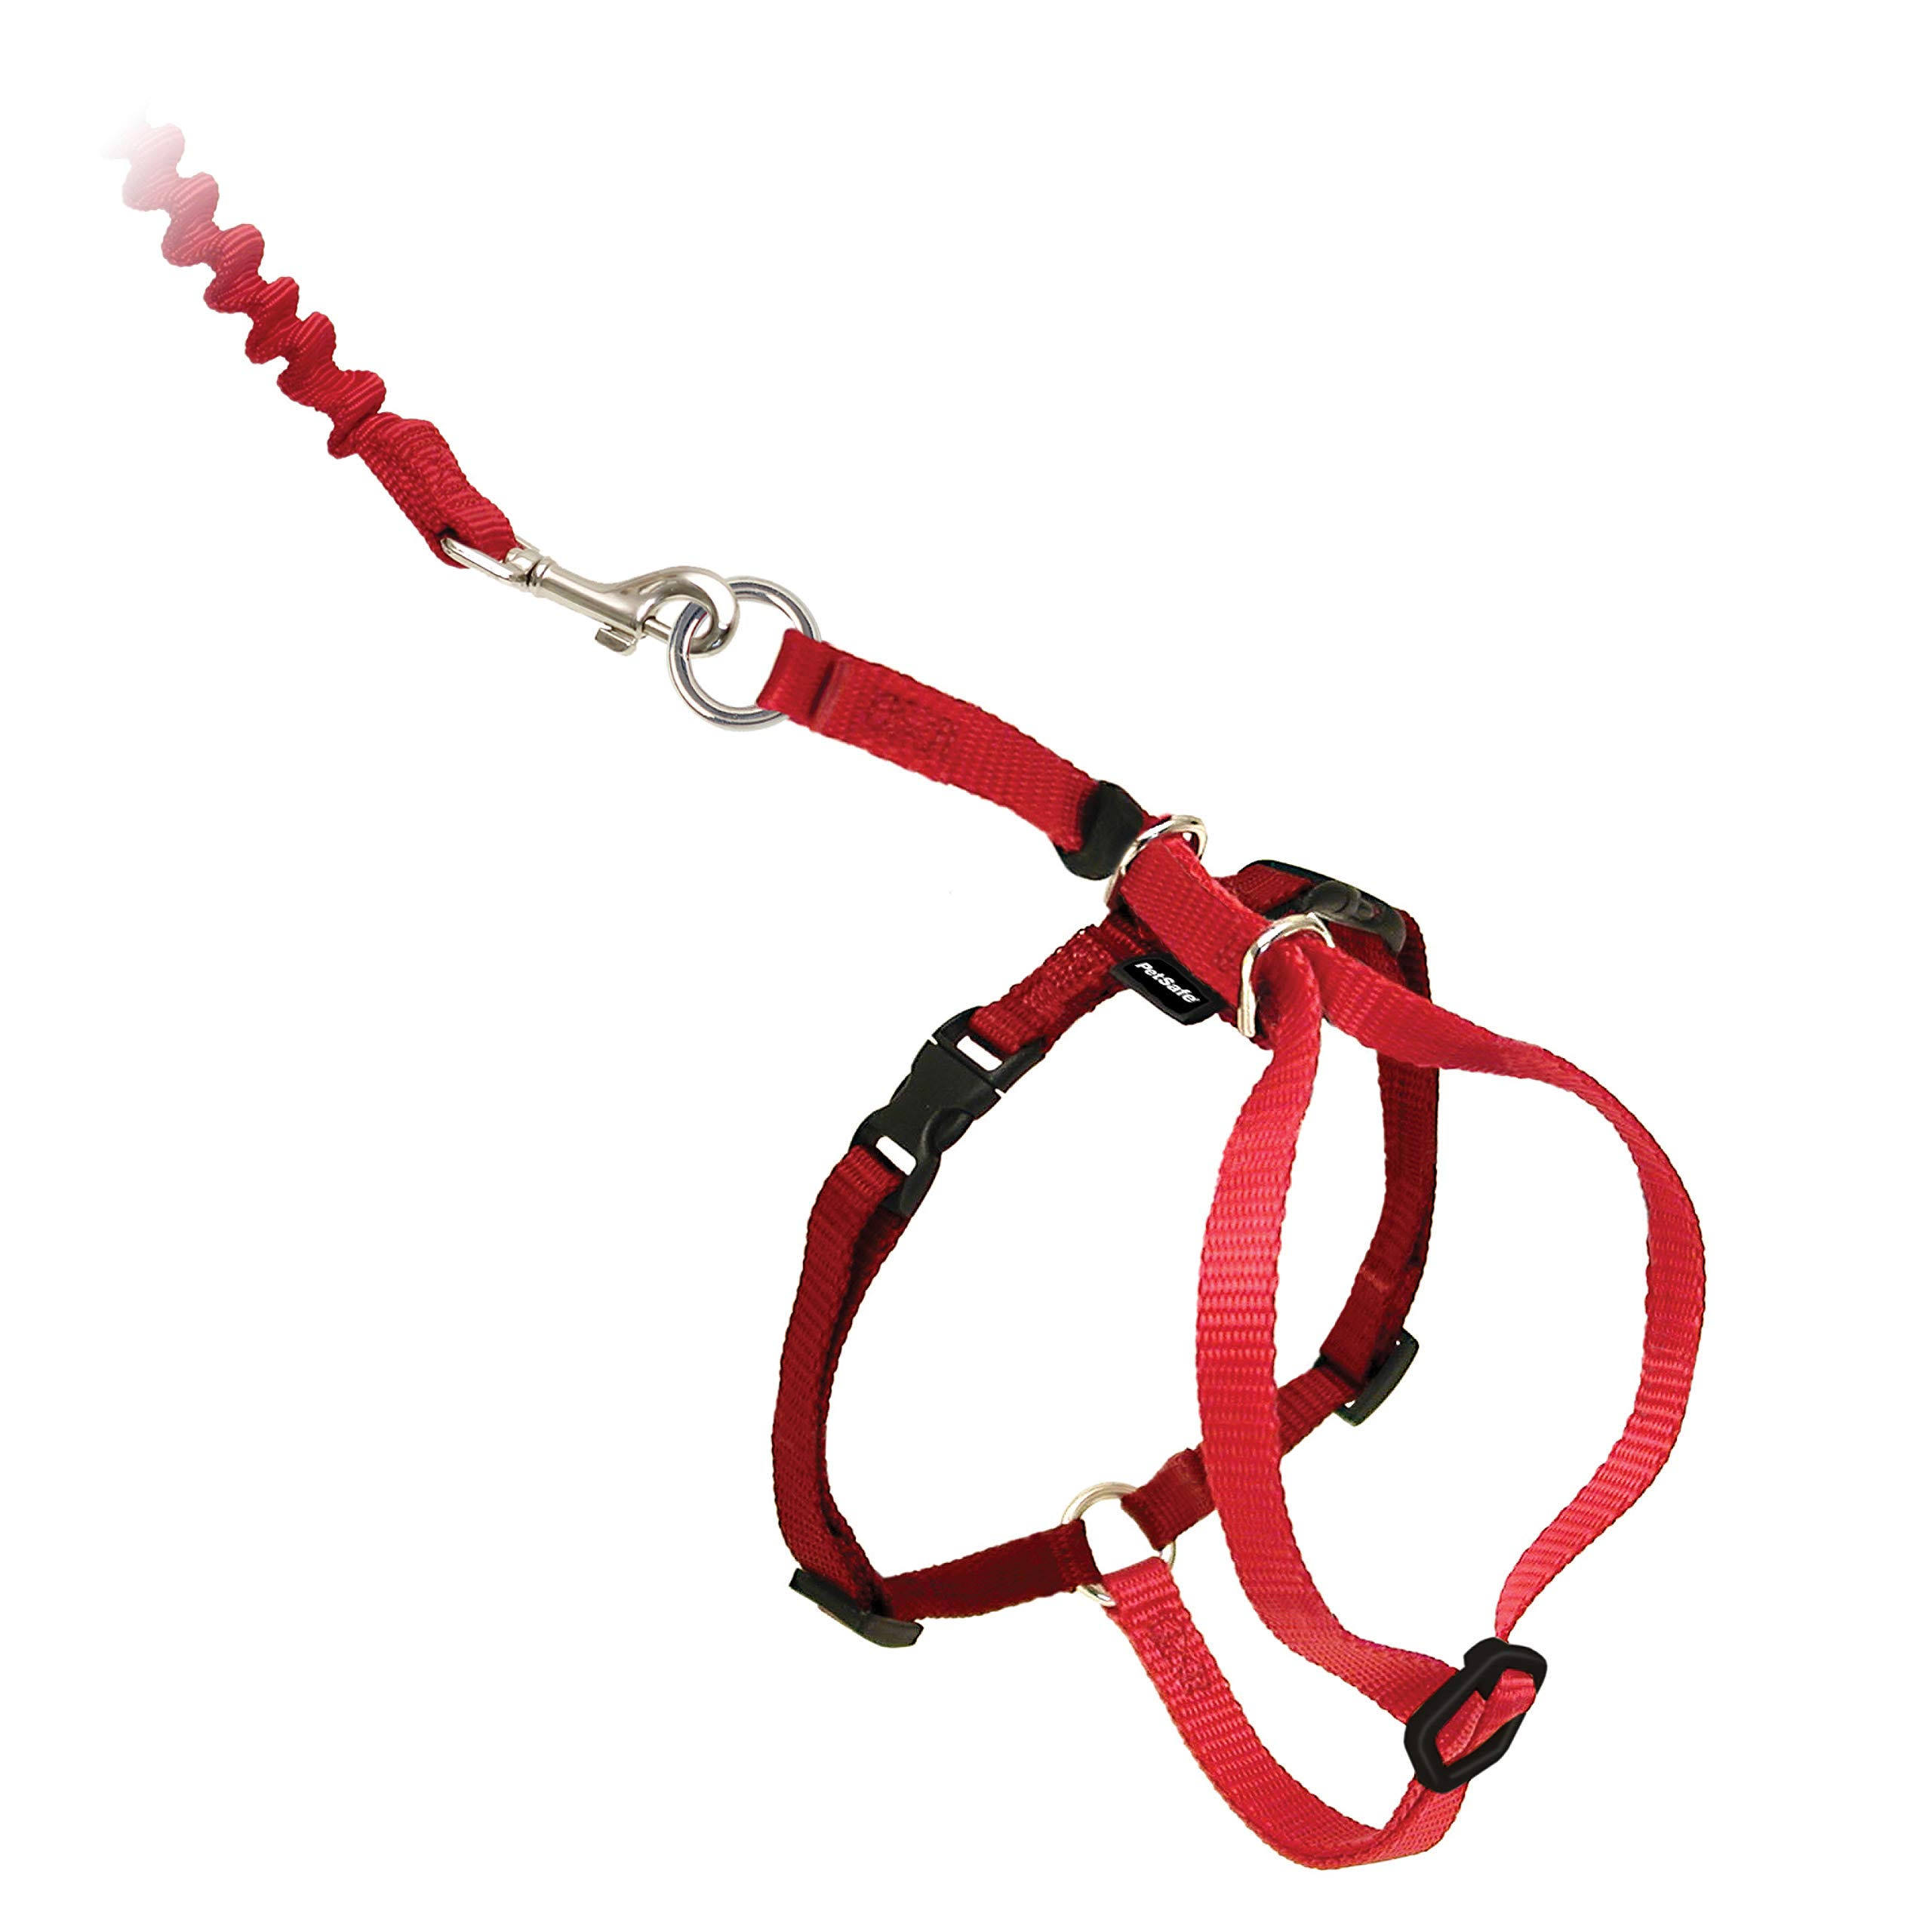 Come With Me Kitty Harness & Bungee Leash - Red, Medium